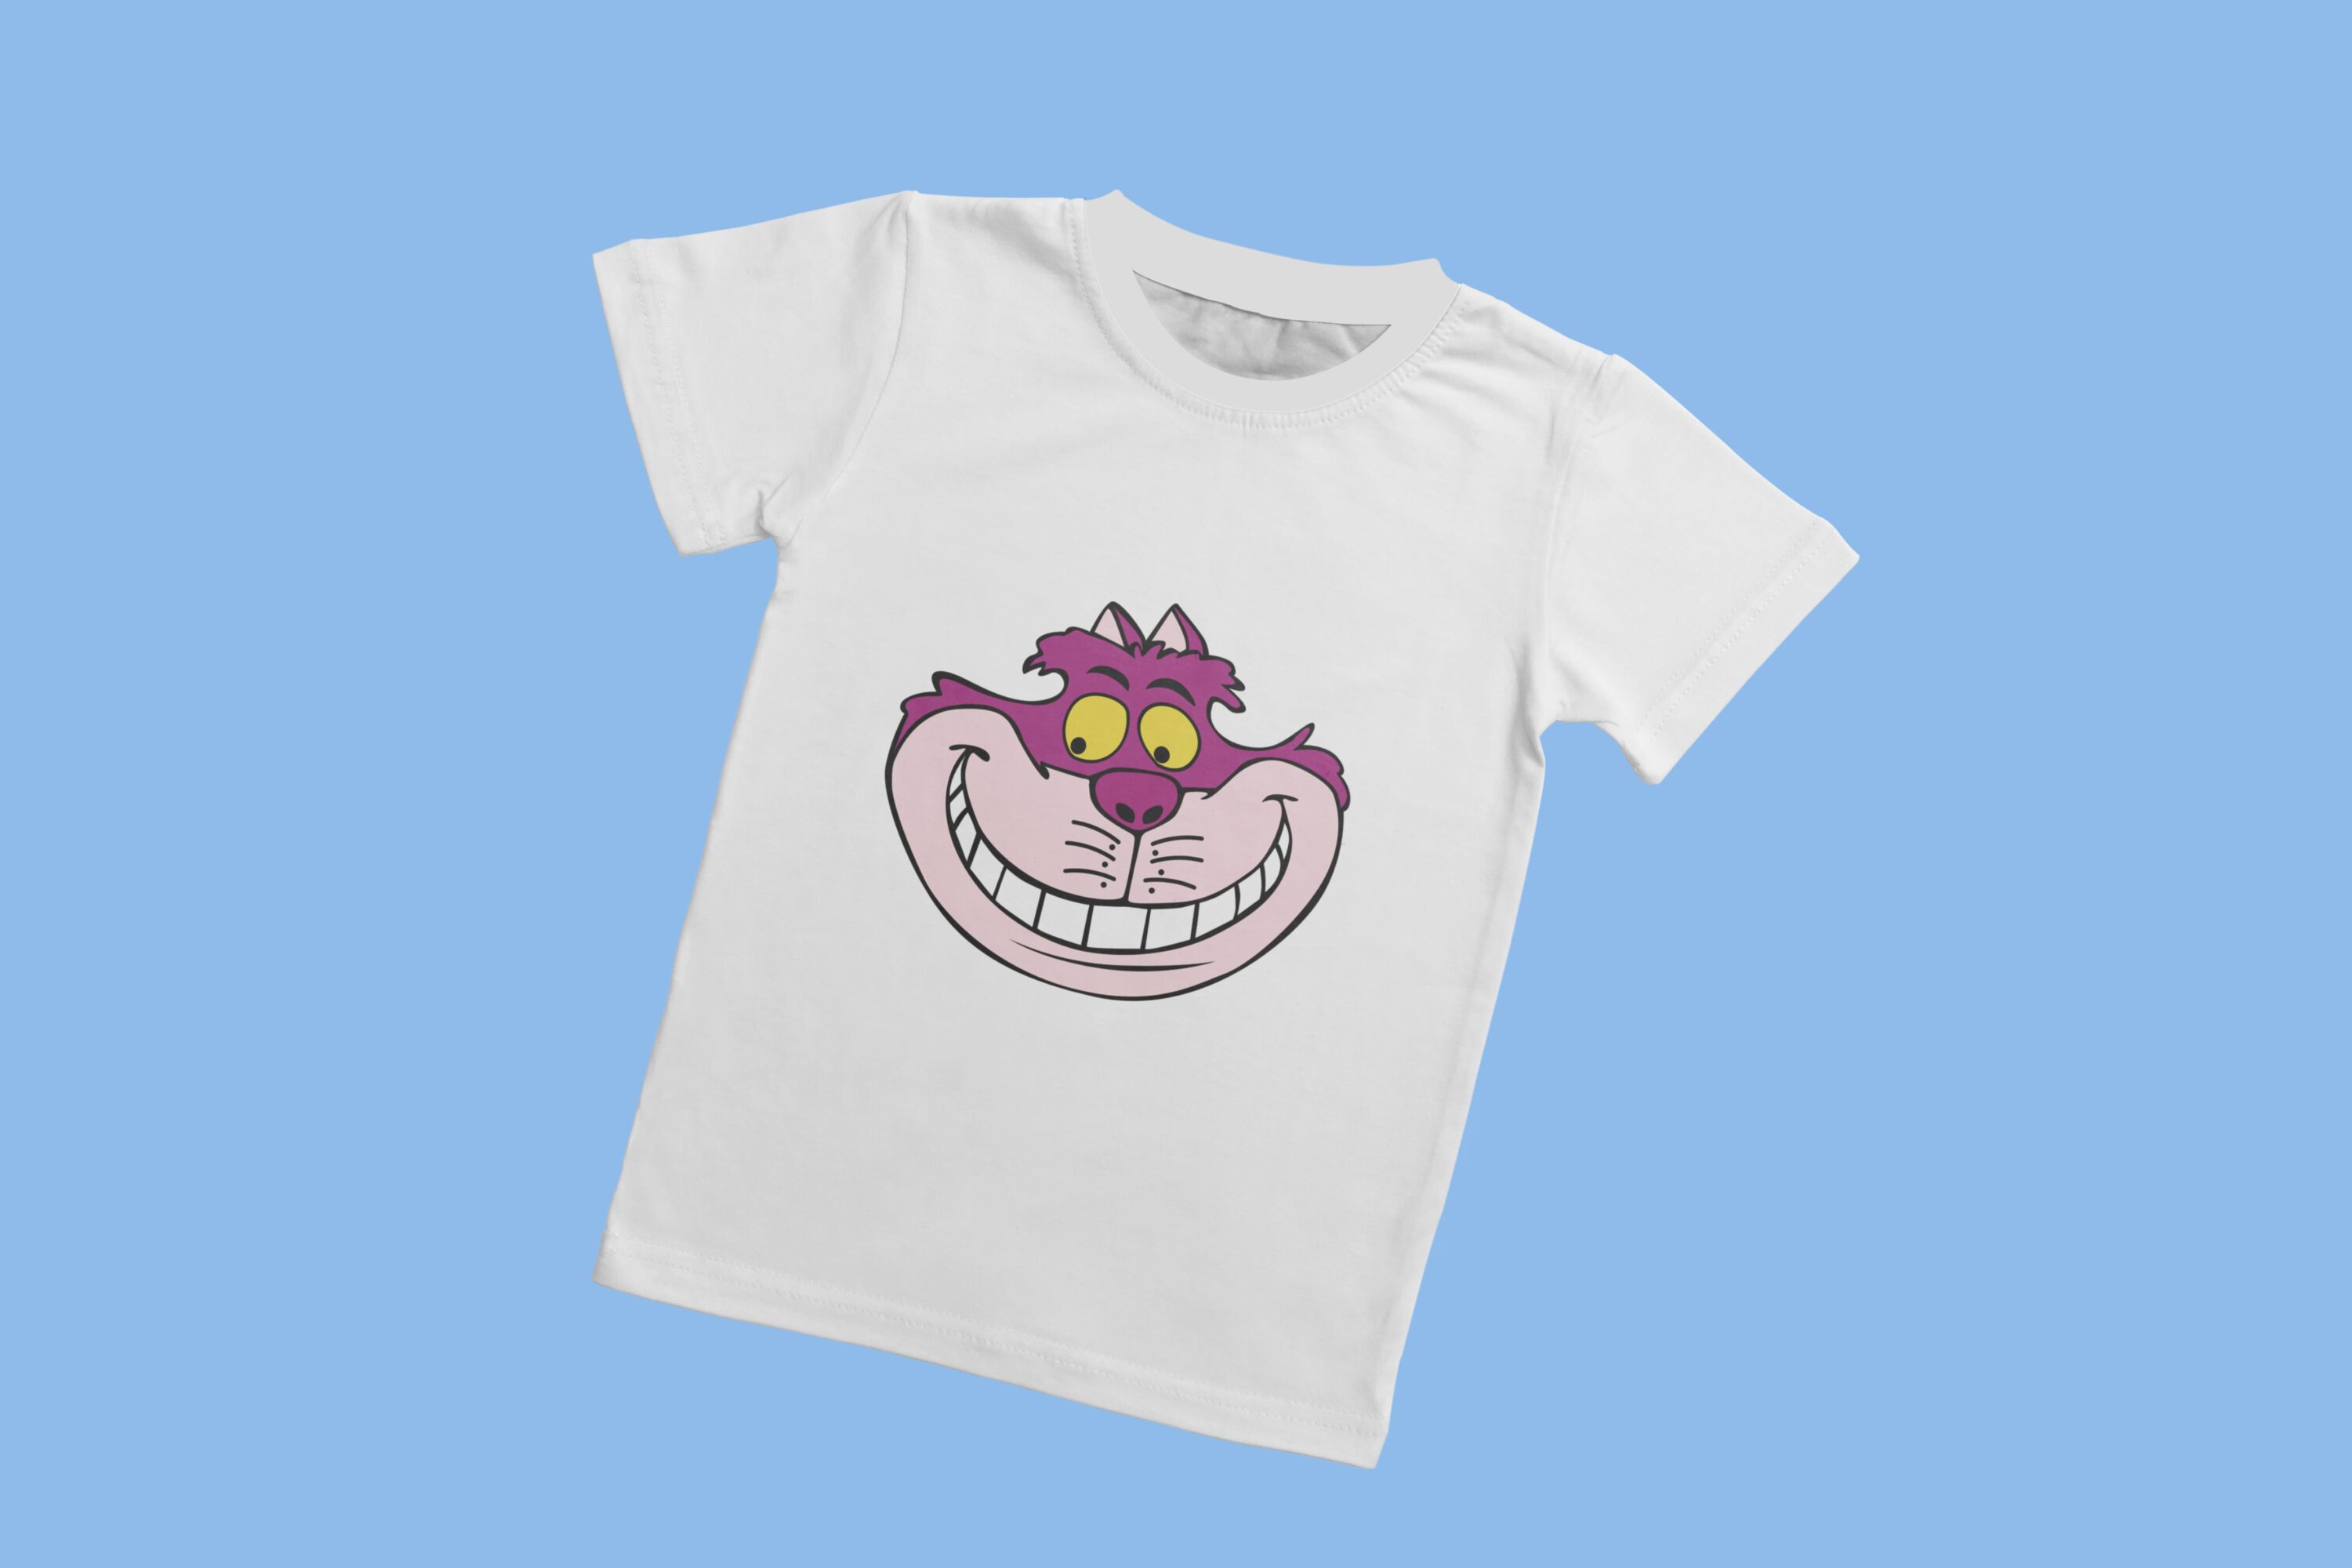 White T-shirt with a white collar and the face of the Cheshire cat, which looks in the lower left corner, on a blue background.